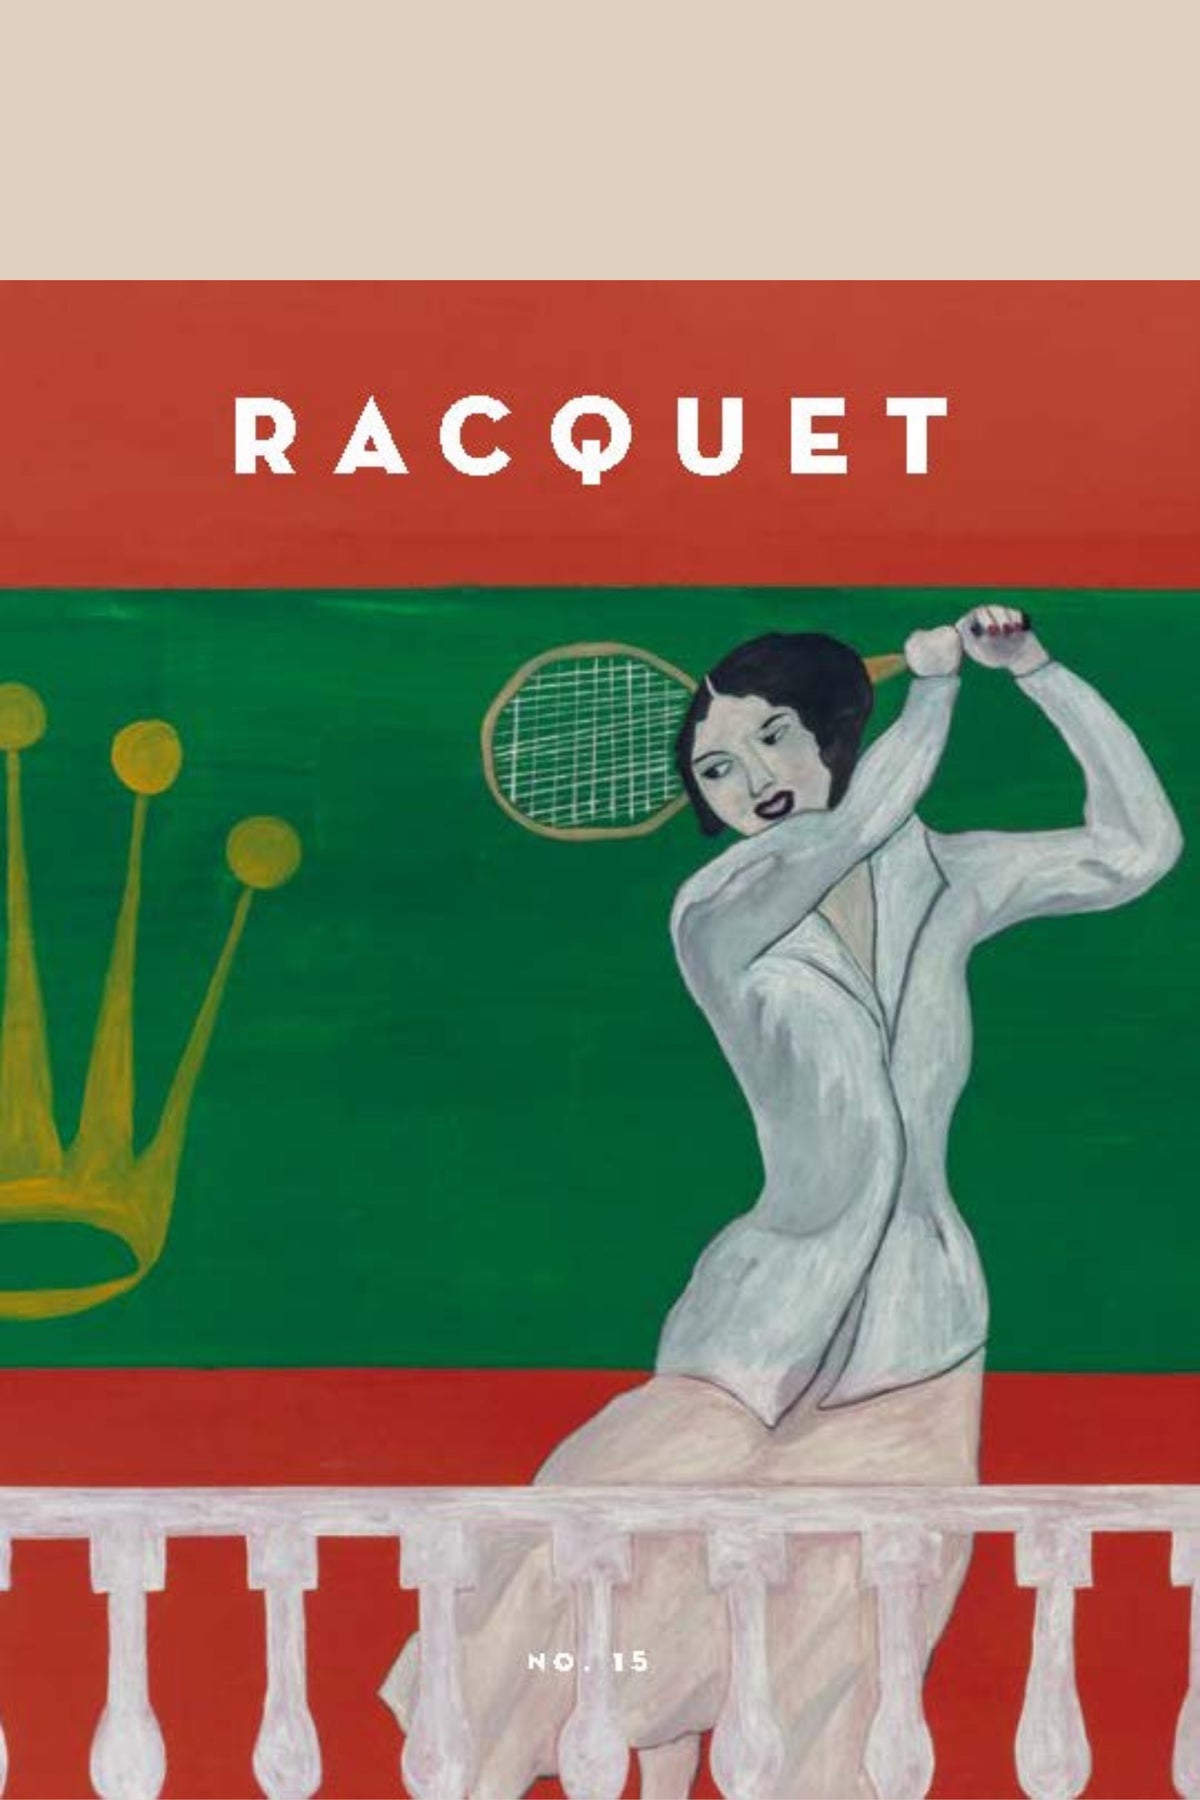 Racquet Issue No. 15